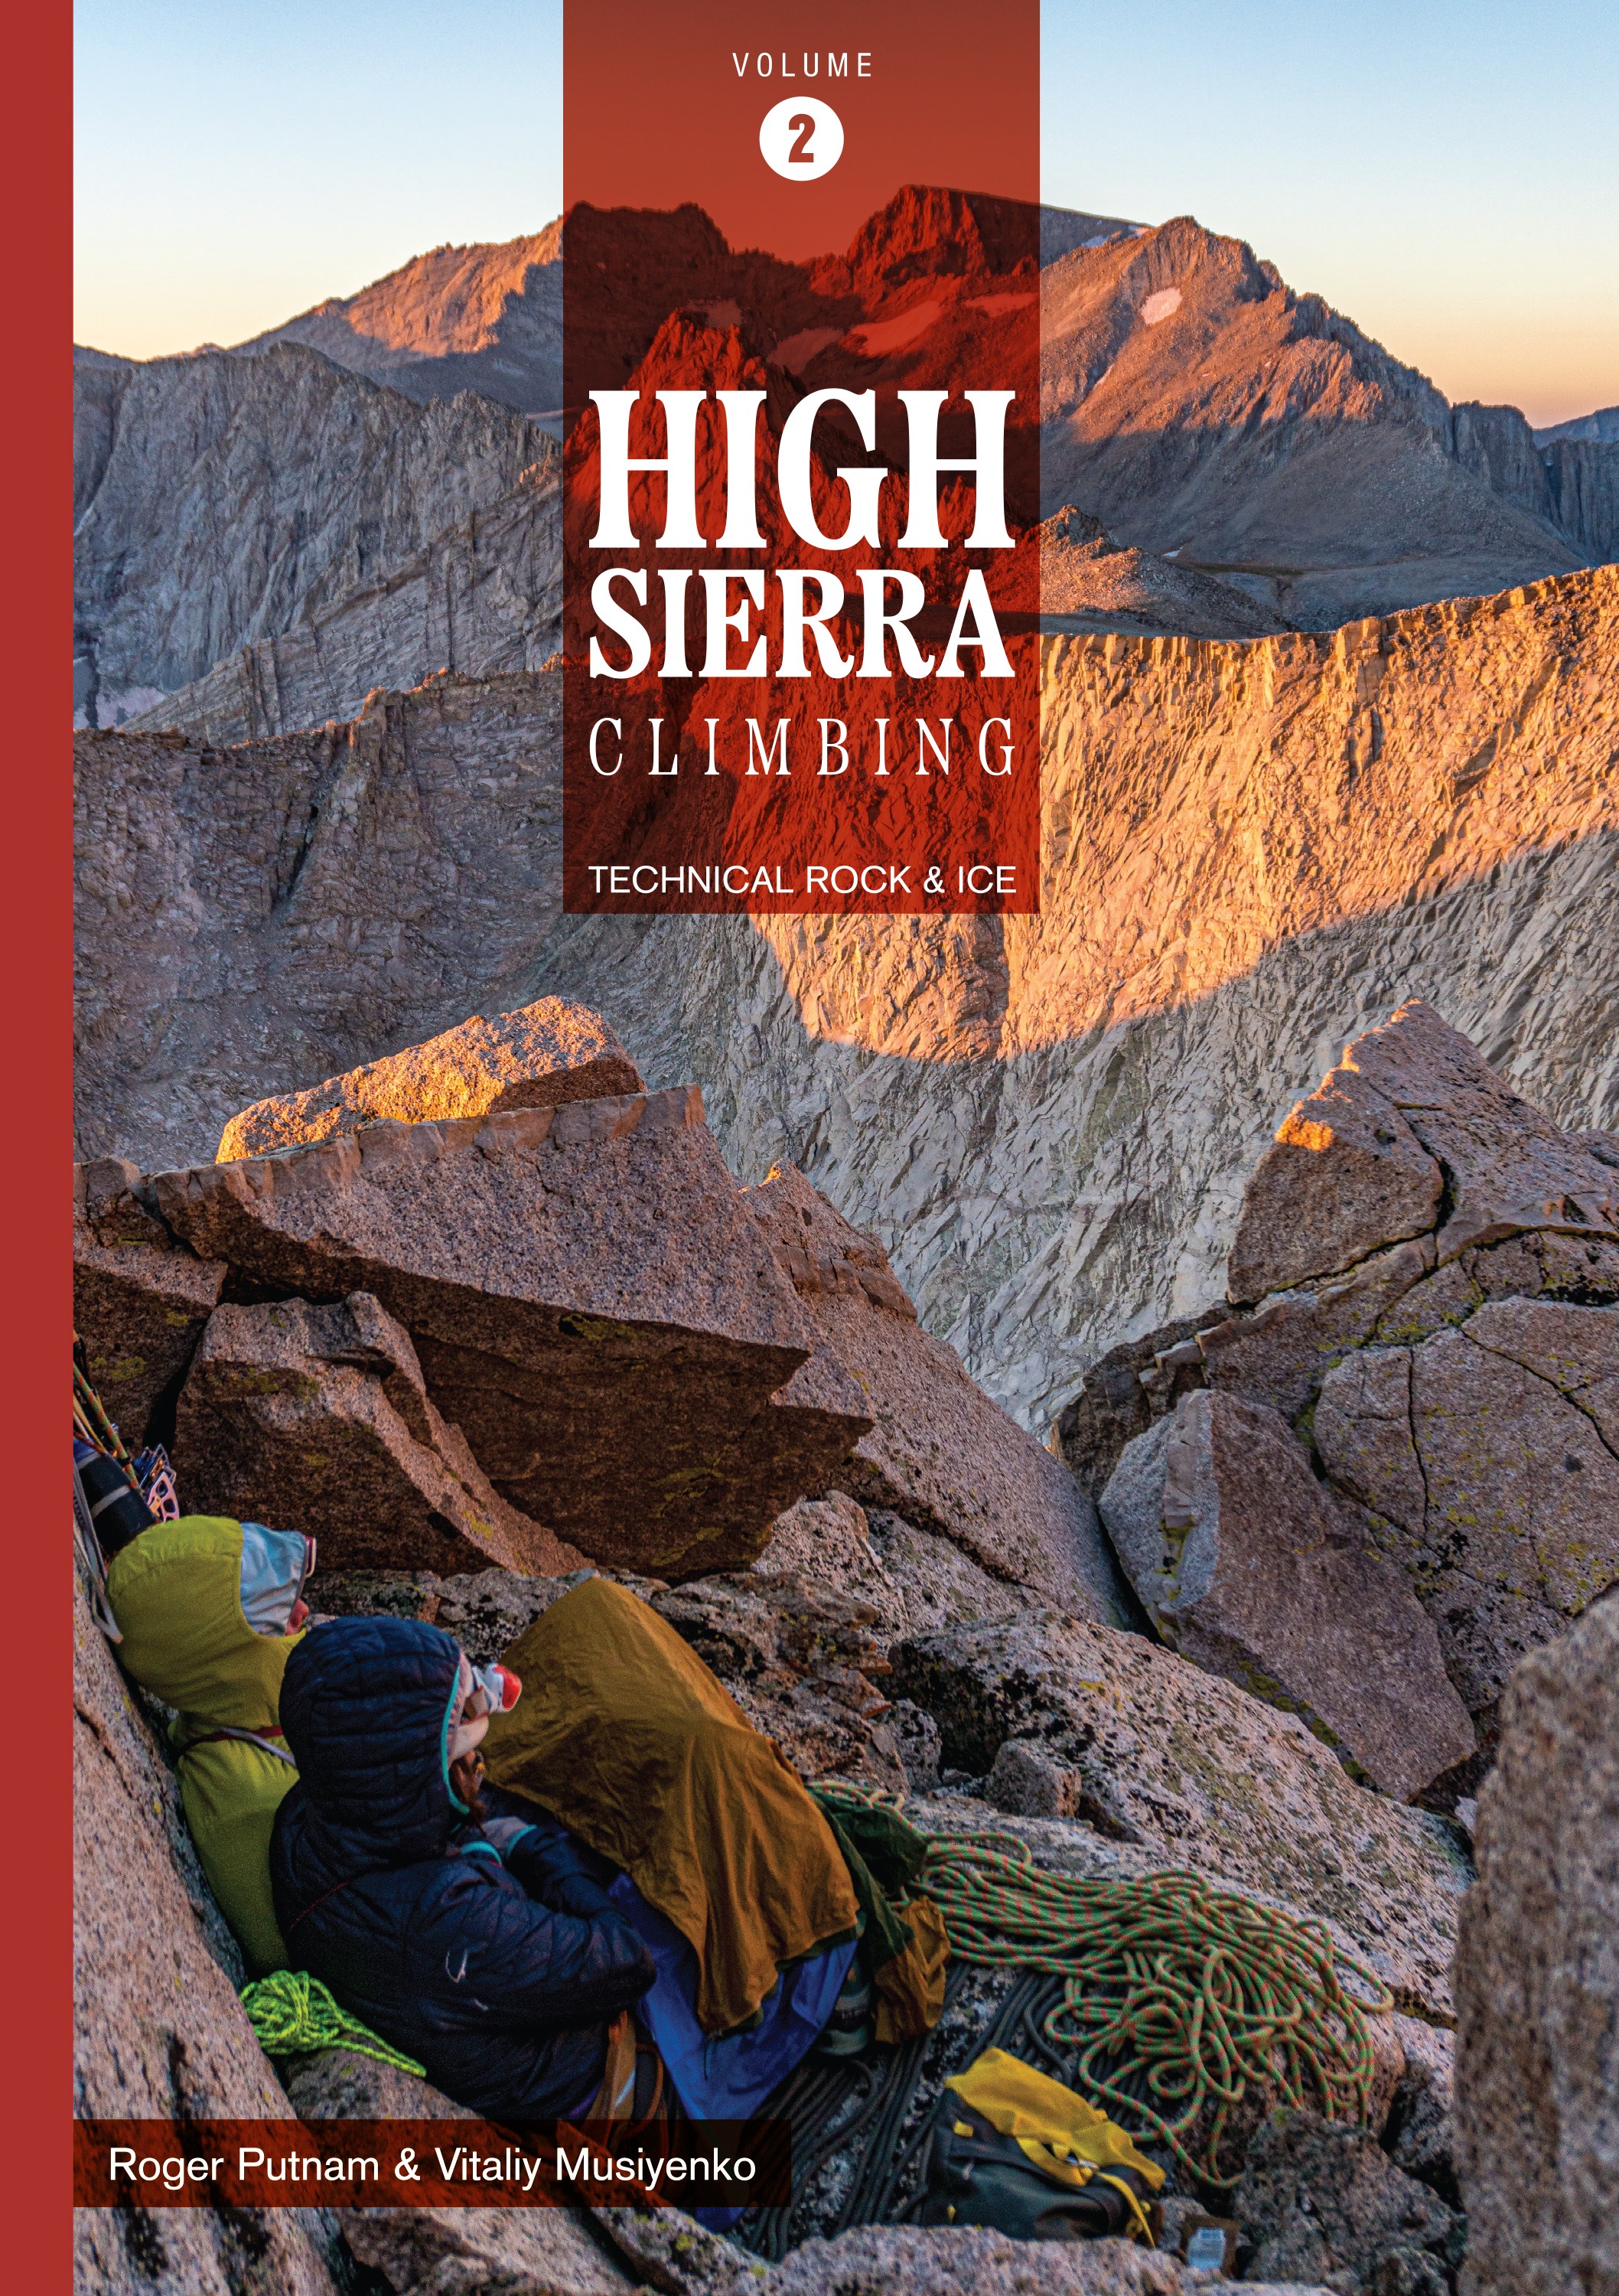 High Sierra Climbing Volume 2 (Available now)